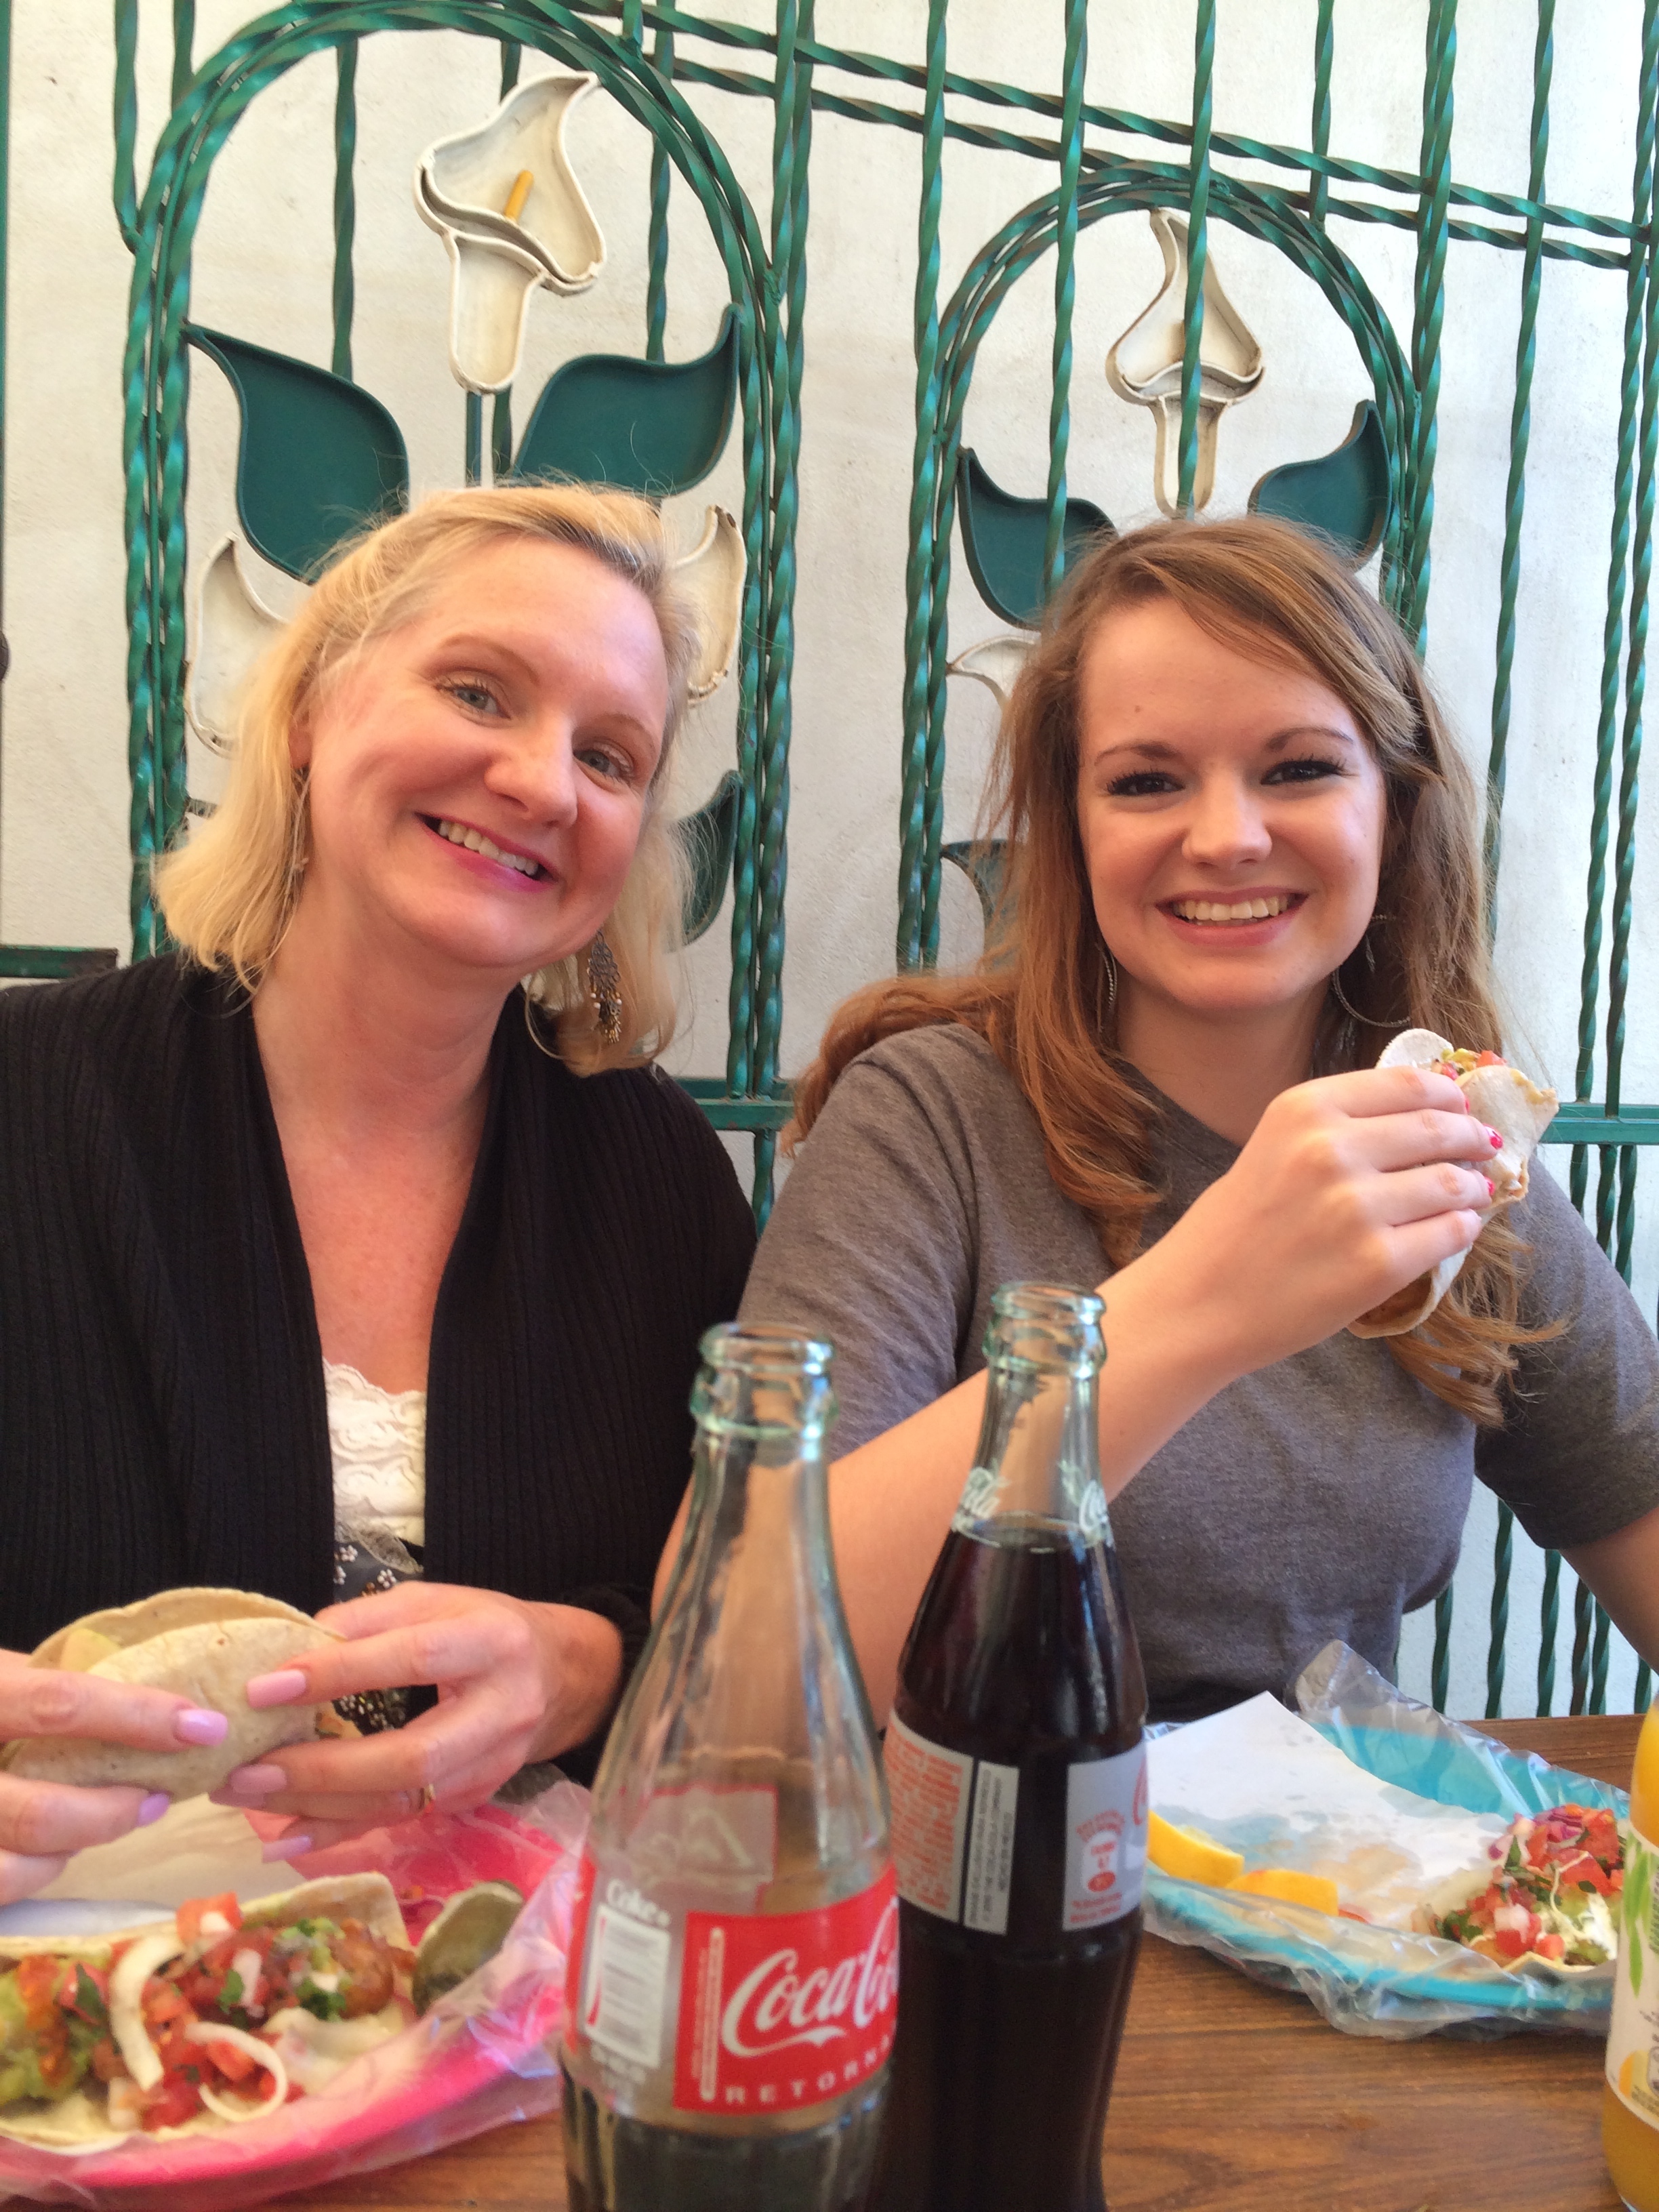 Dawn & Hannah enjoying some fish & shrimp tacos! Ensenada is famous for it's fish tacos, so it was a  cultural experience - Muy sabroso!